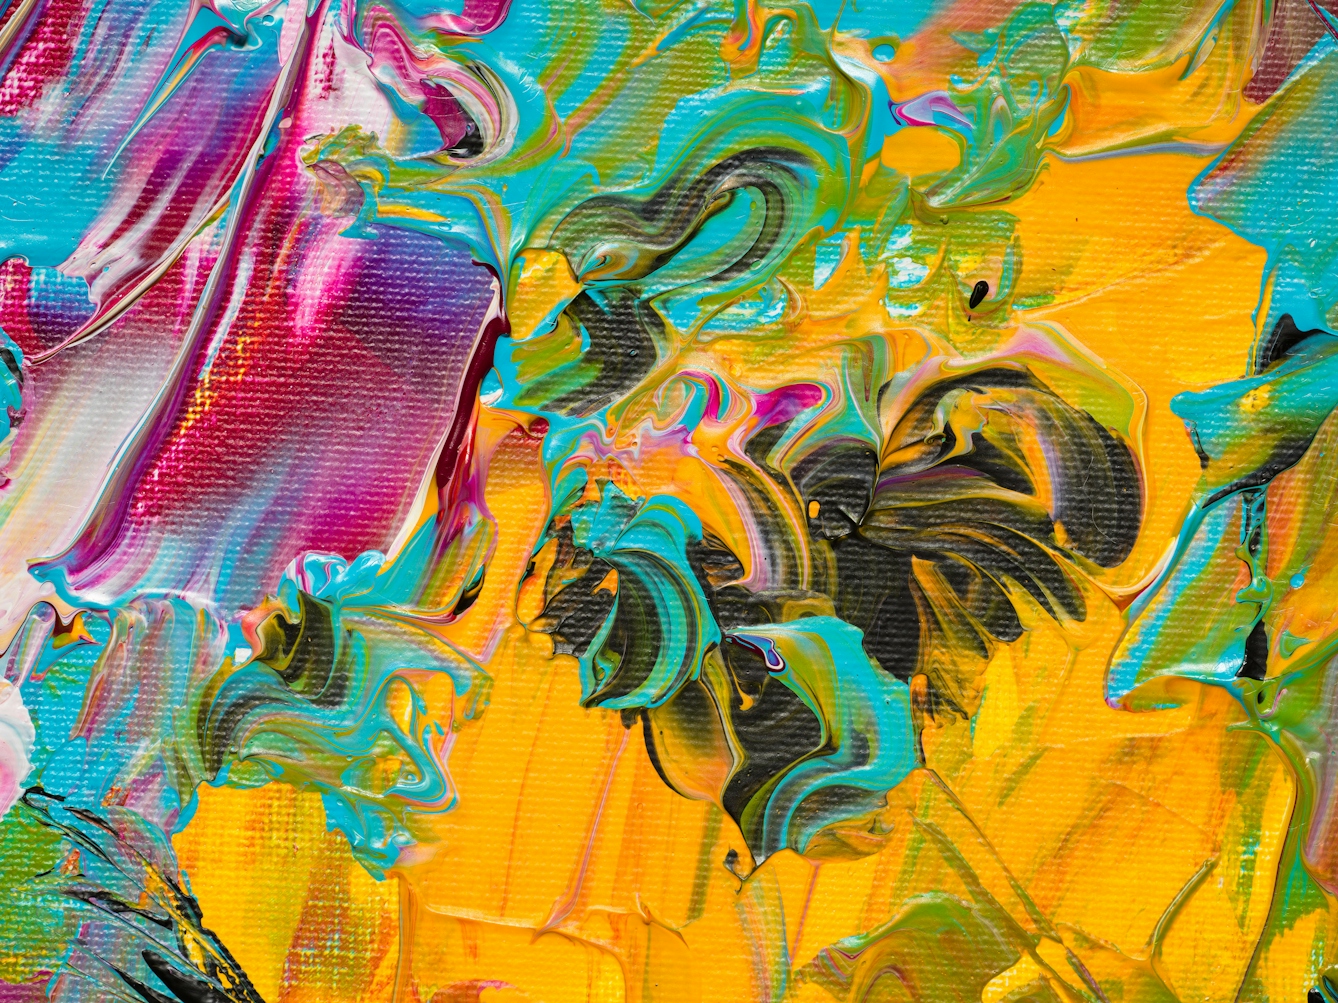 Photograph of close-up detail of a larger abstract  expressionist painting  utilising acrylic paint on a rectangular canvas in landscape orientation. A vast majority of the canvas surface contains many scattered, complex and confusing marks and gestures of vibrant and colourful tones - including yellow, pink, orange, turquoise, white. It's akin to a frenetic and overwhelming scene of repeated surprises and shocks.